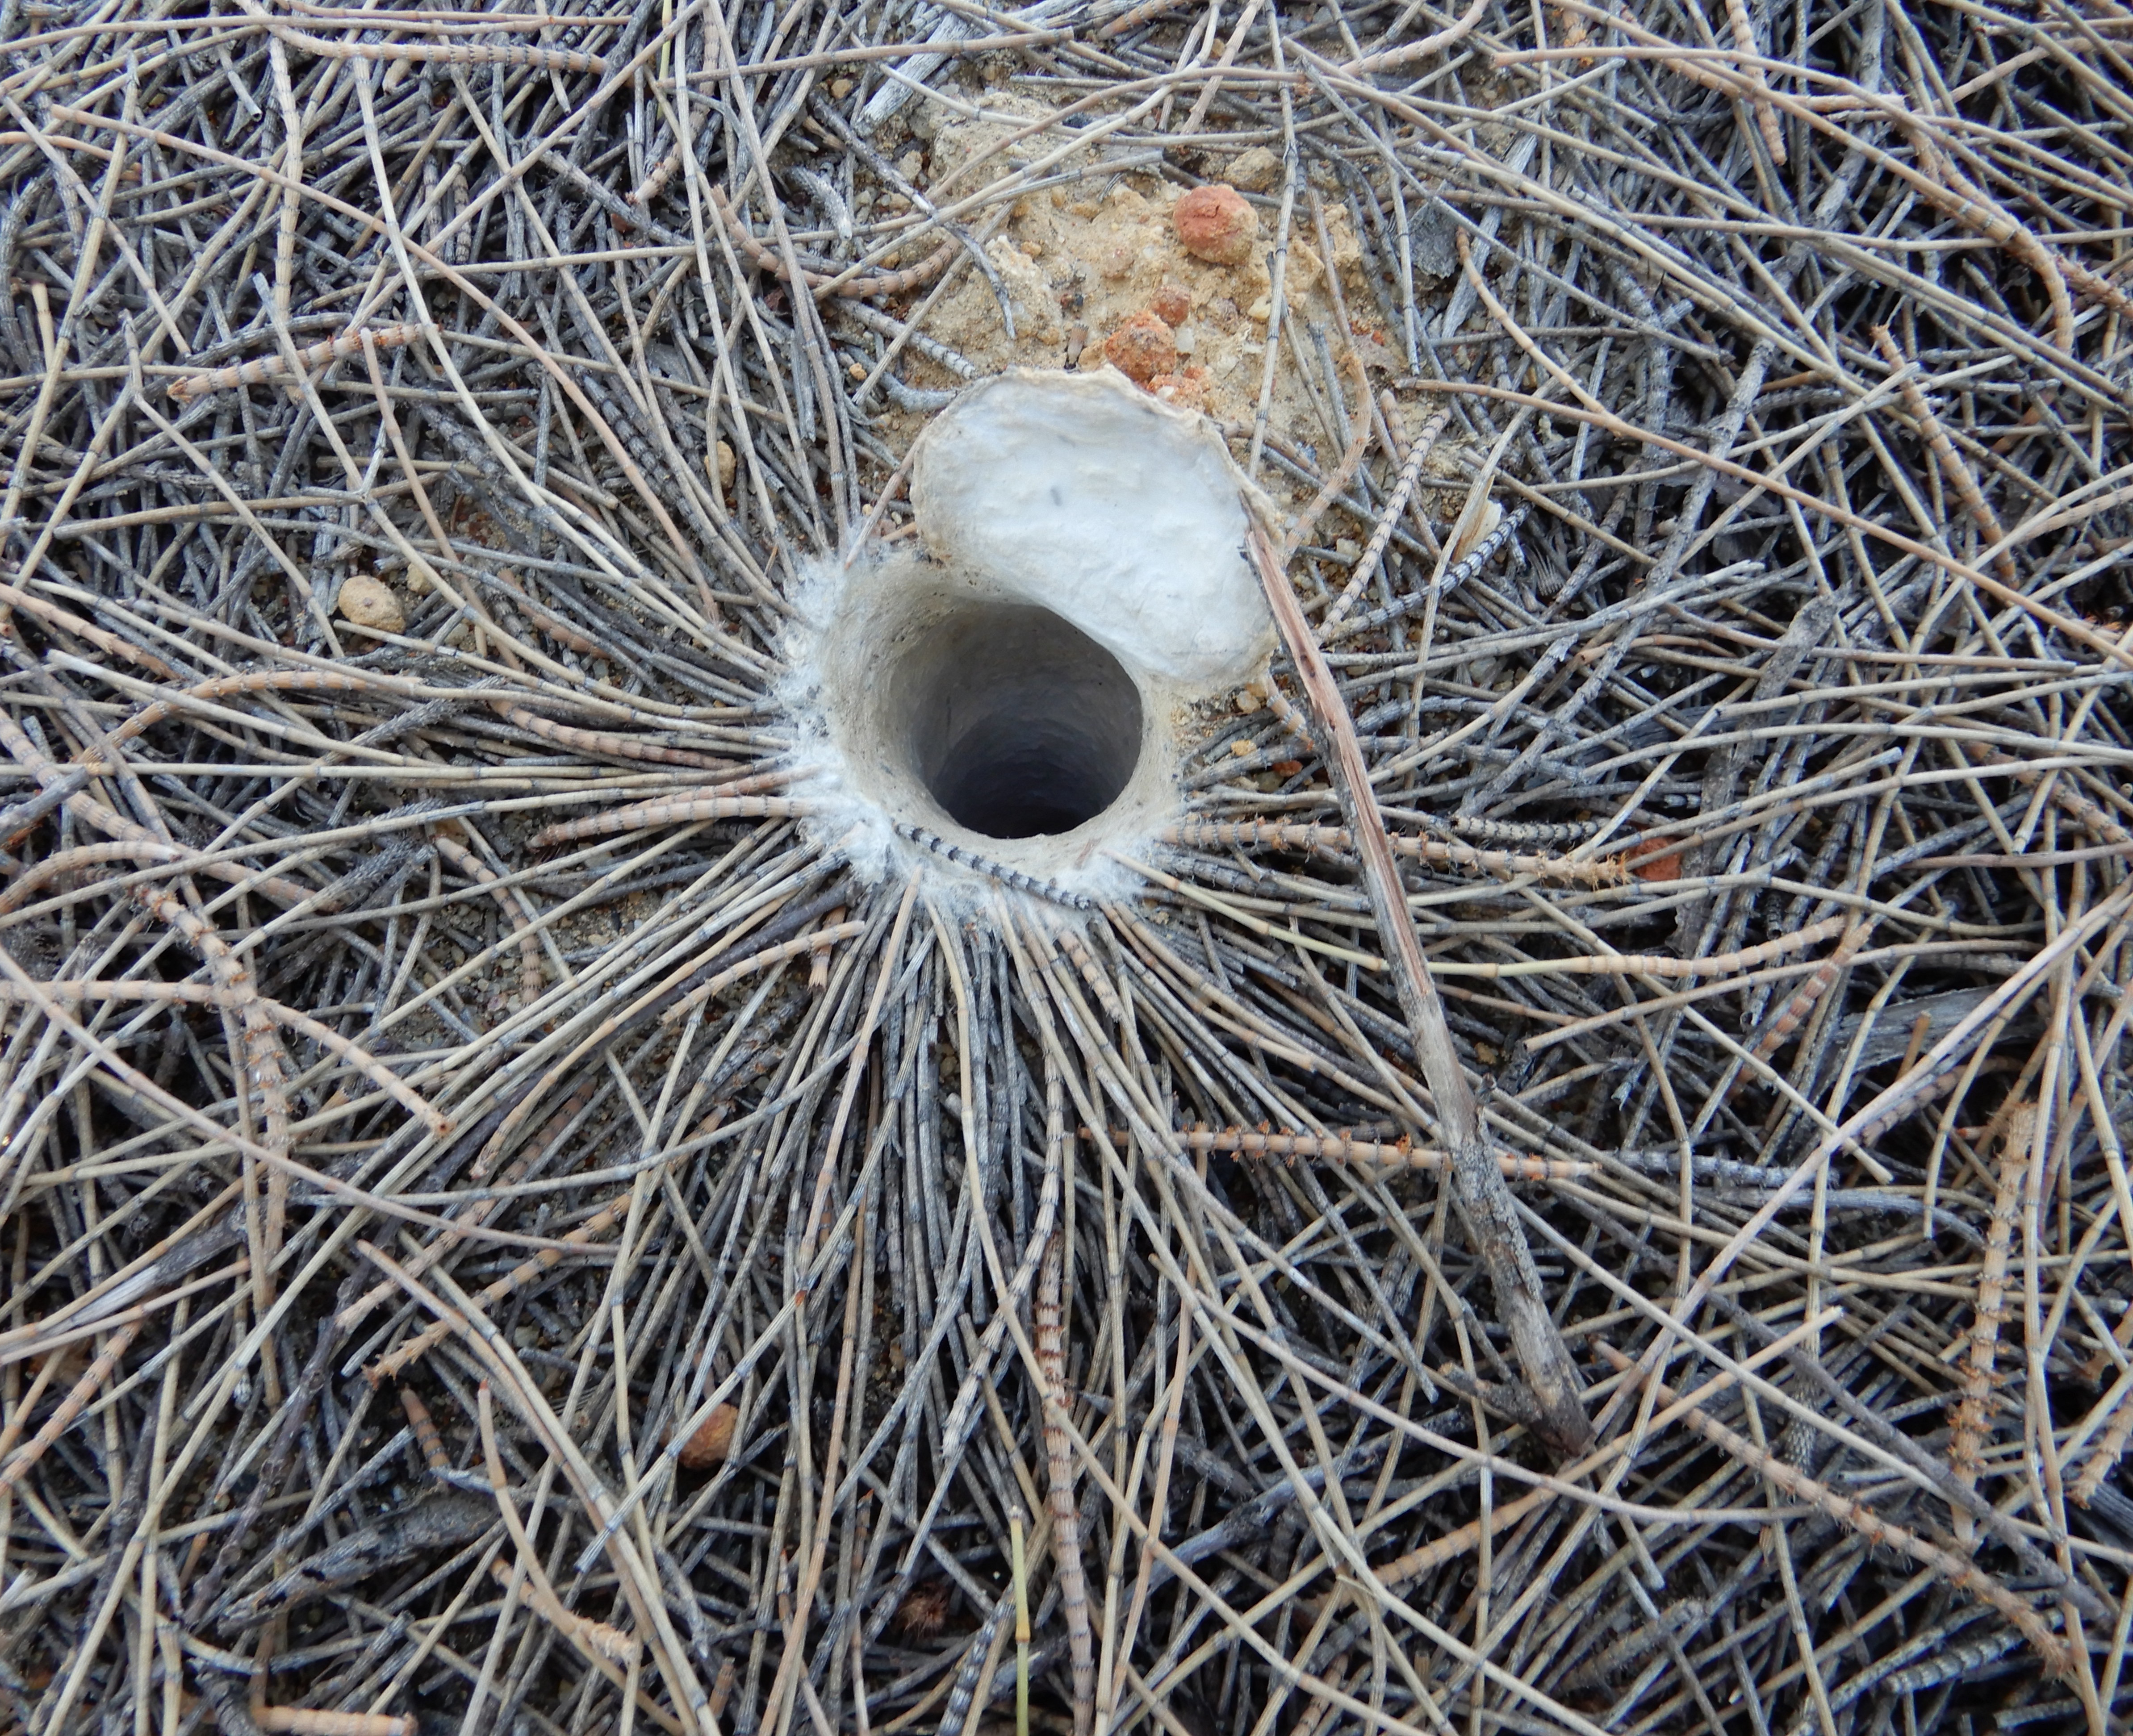 spiders burrowing in the ground